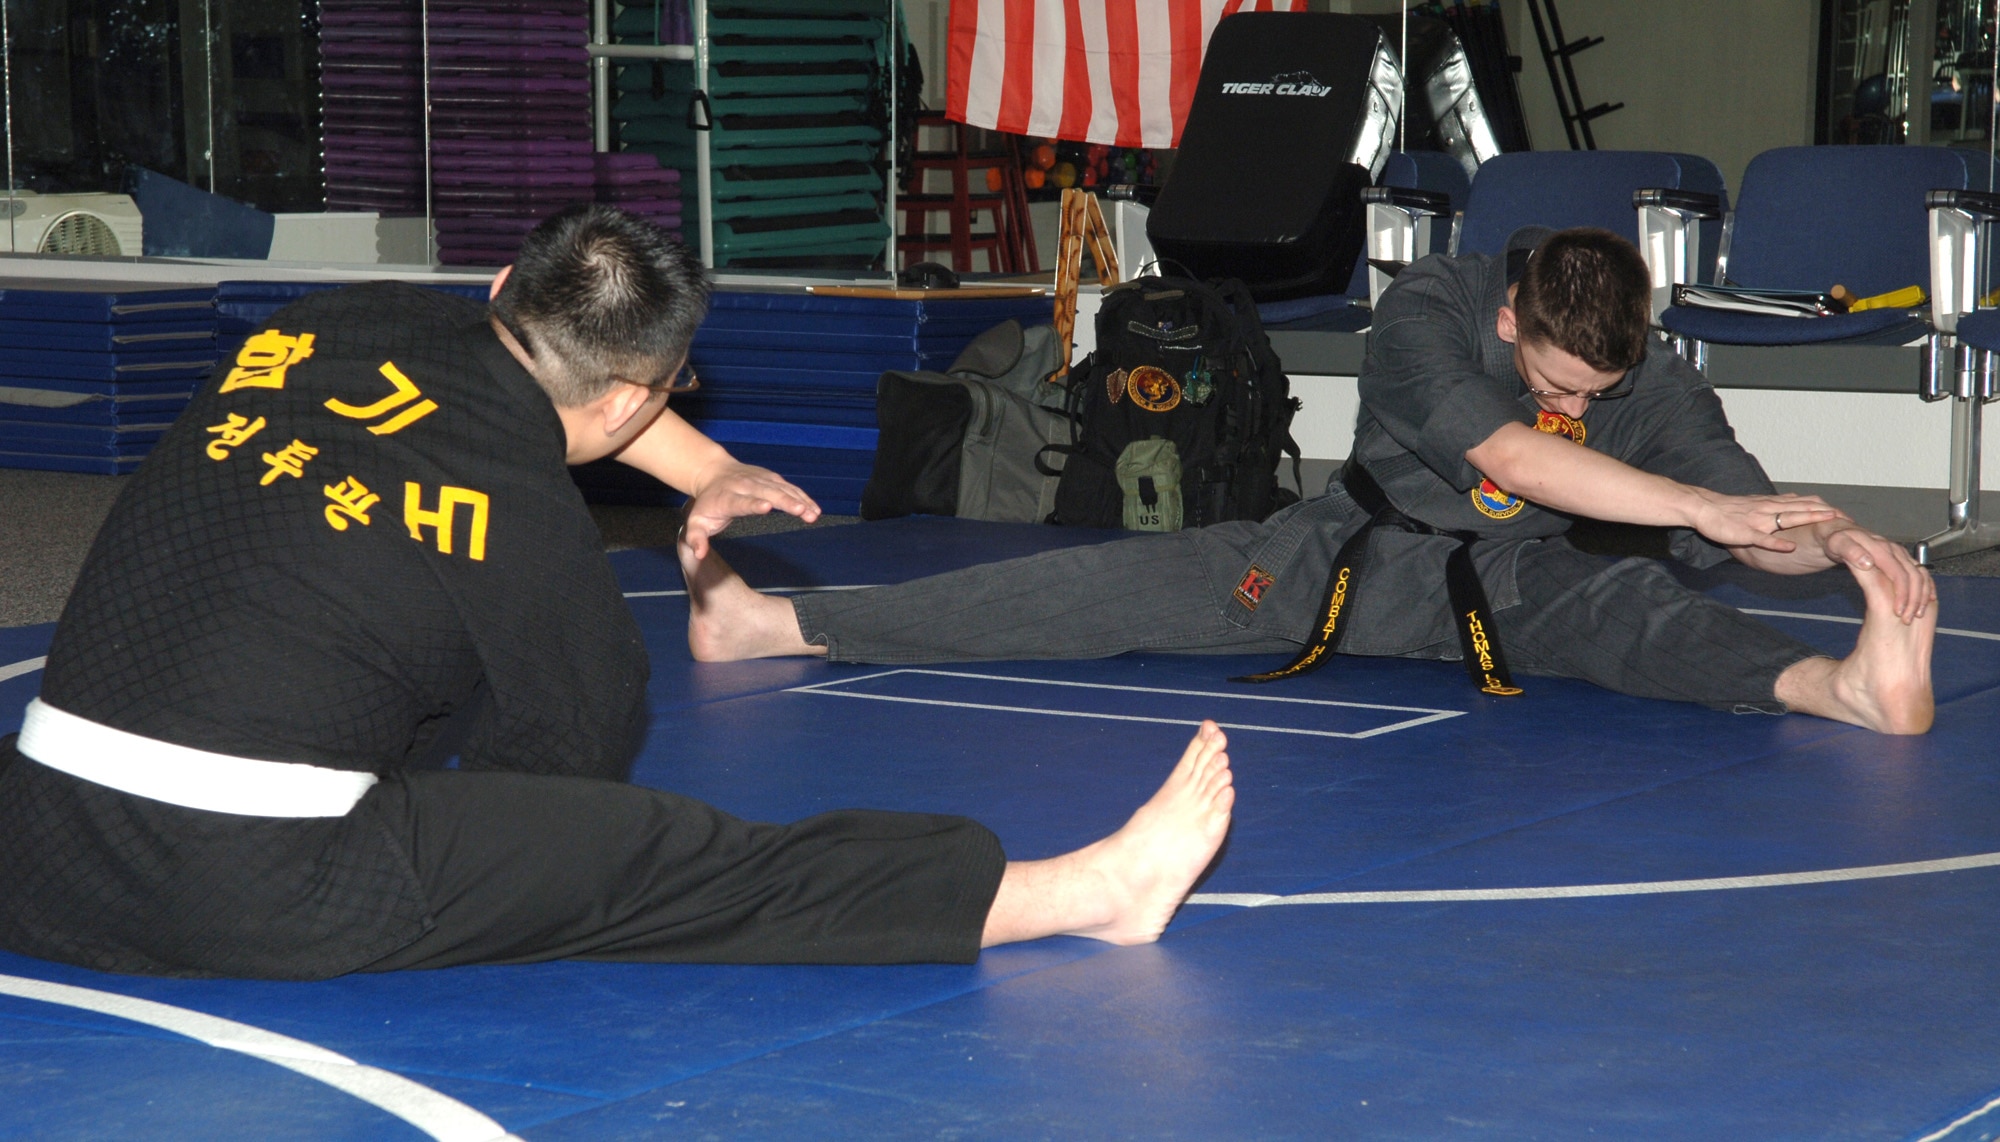 FAIRCHILD AIR FORCE BASE, Wash. -- Staff Sergeant Thomas Locke, begins his Combat Hapkido class with stretches at the base Fitness Center on Feb. 5. Sergeant Locke has been studying Combat Hapkido for five years, but has studied several other martial arts for more than twelve. The Combat Hapkido class, which teaches self defense, is offered Tuesdays and Thursdays from 6 to 8 p.m. at the Fitness Center. (U.S. Air Force photo / Senior Airman Jocelyn Ford)